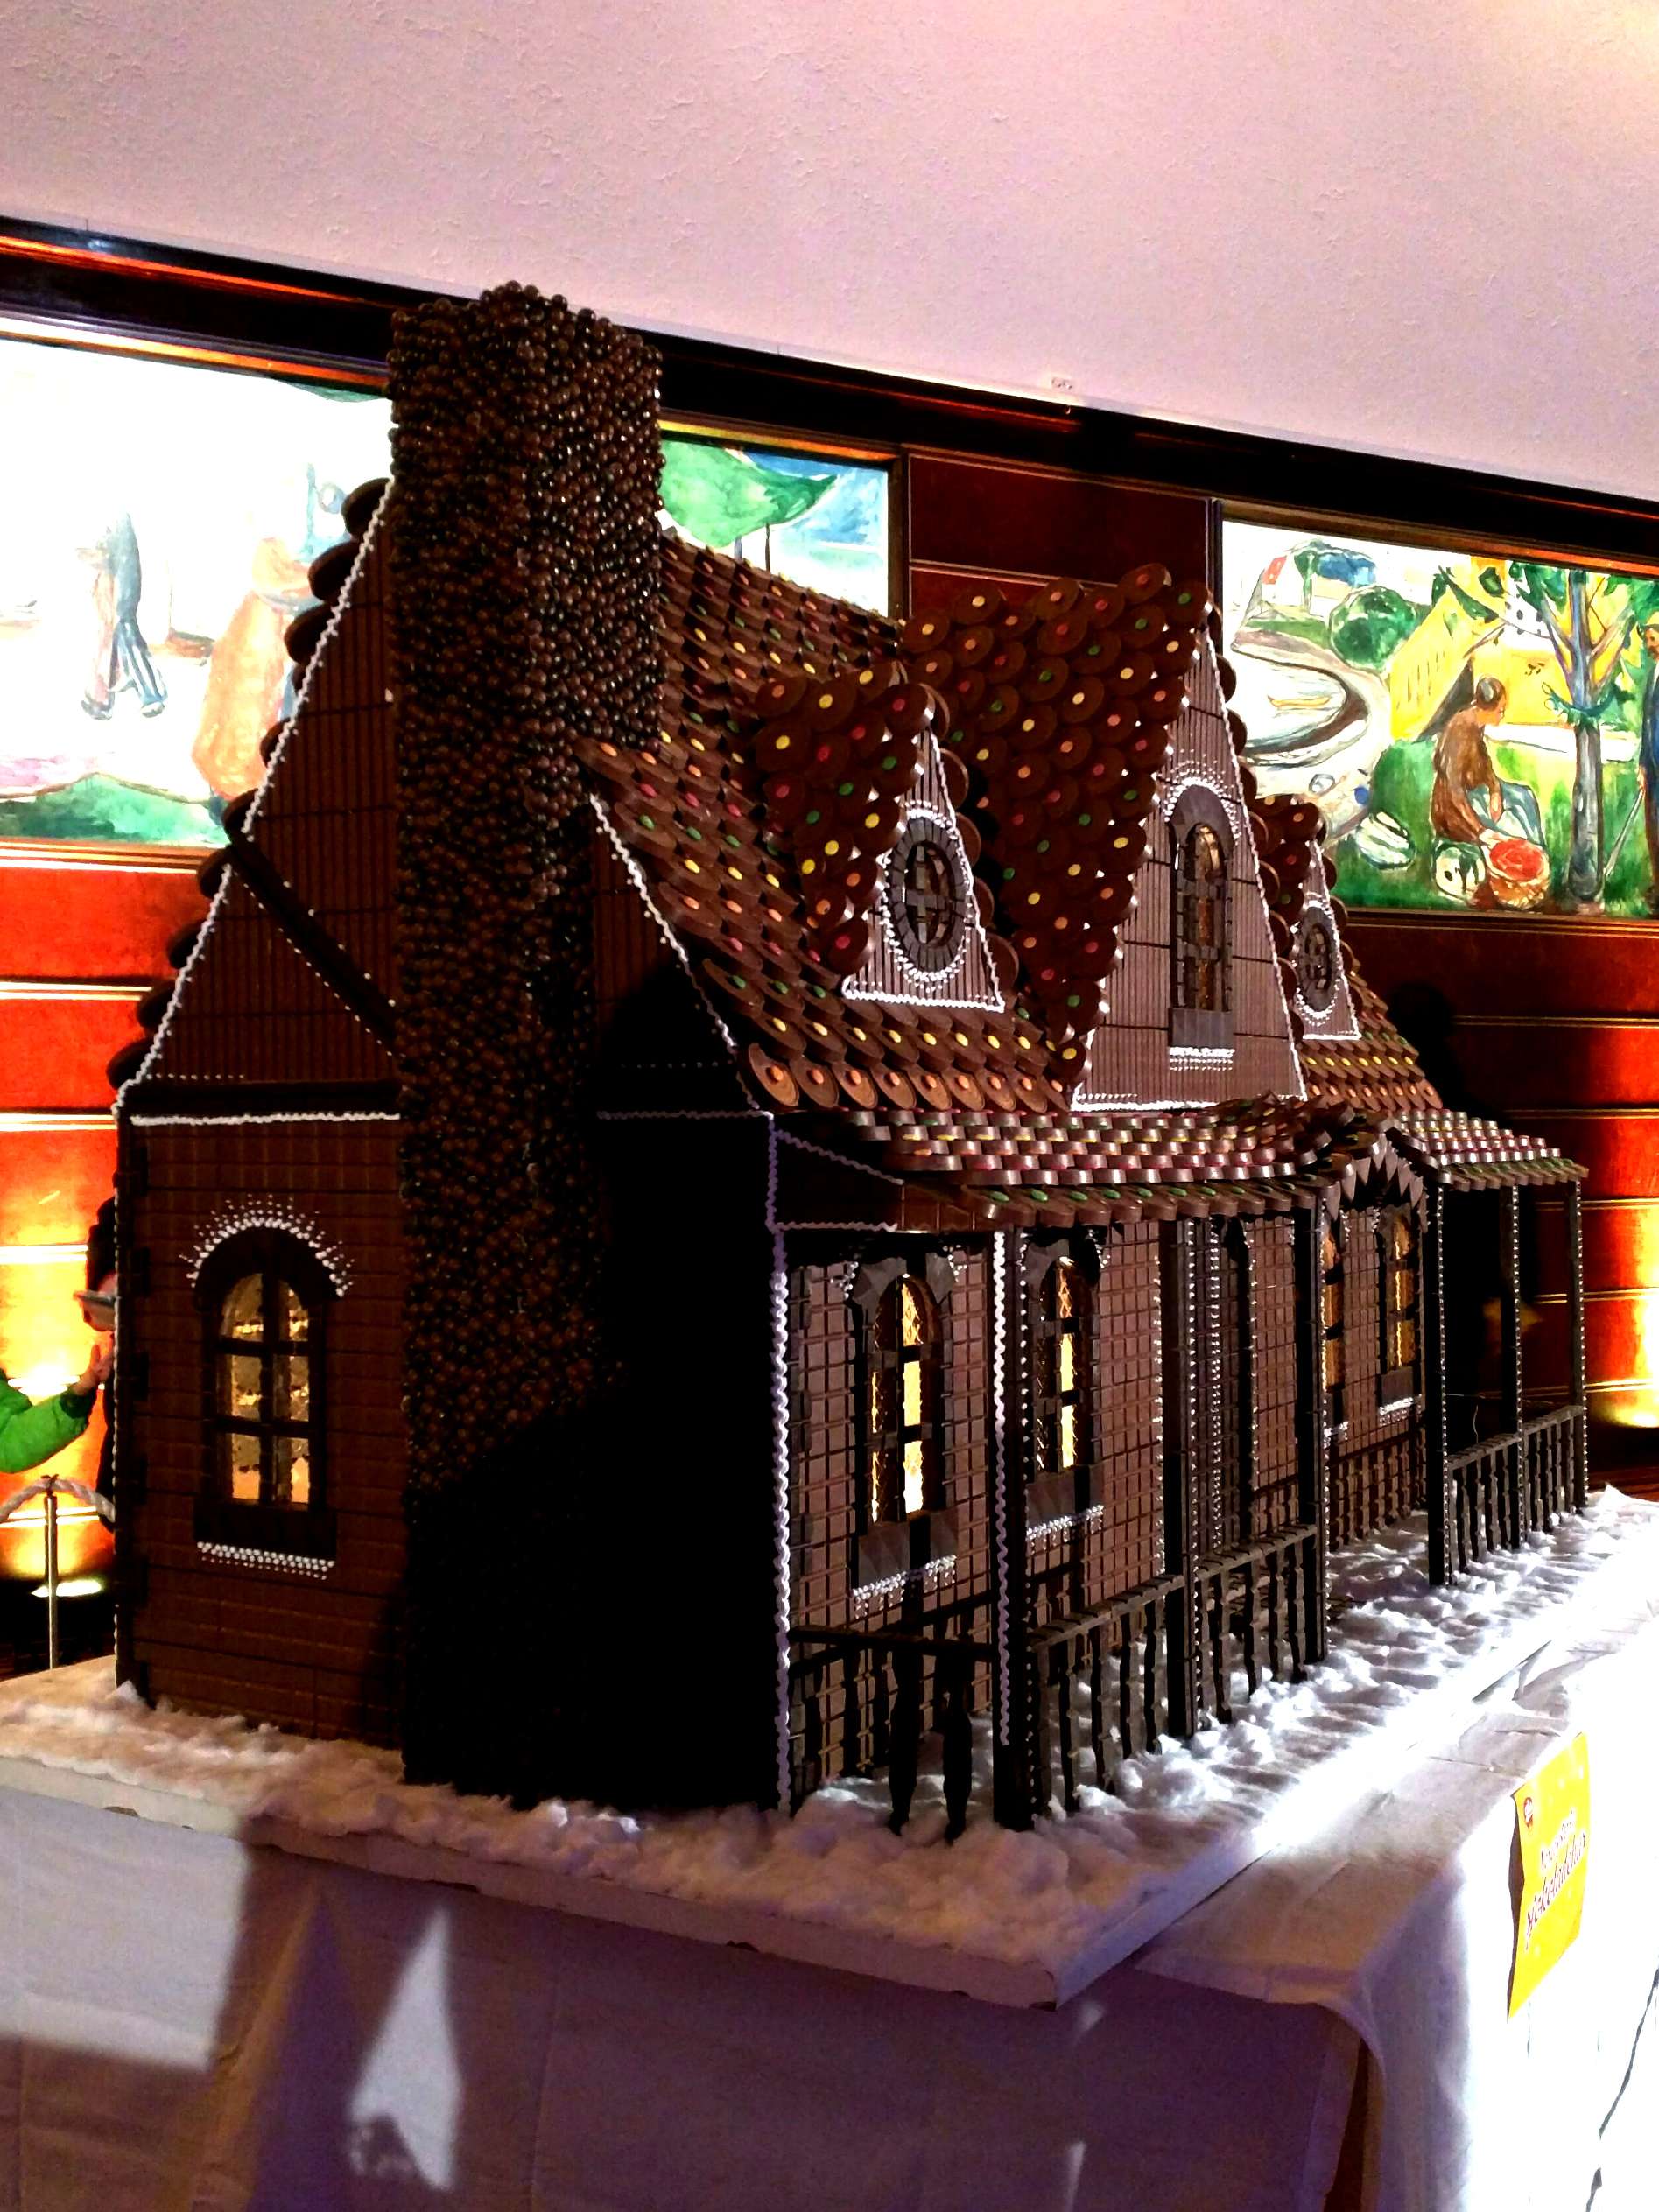 Norway's largest chocolate house